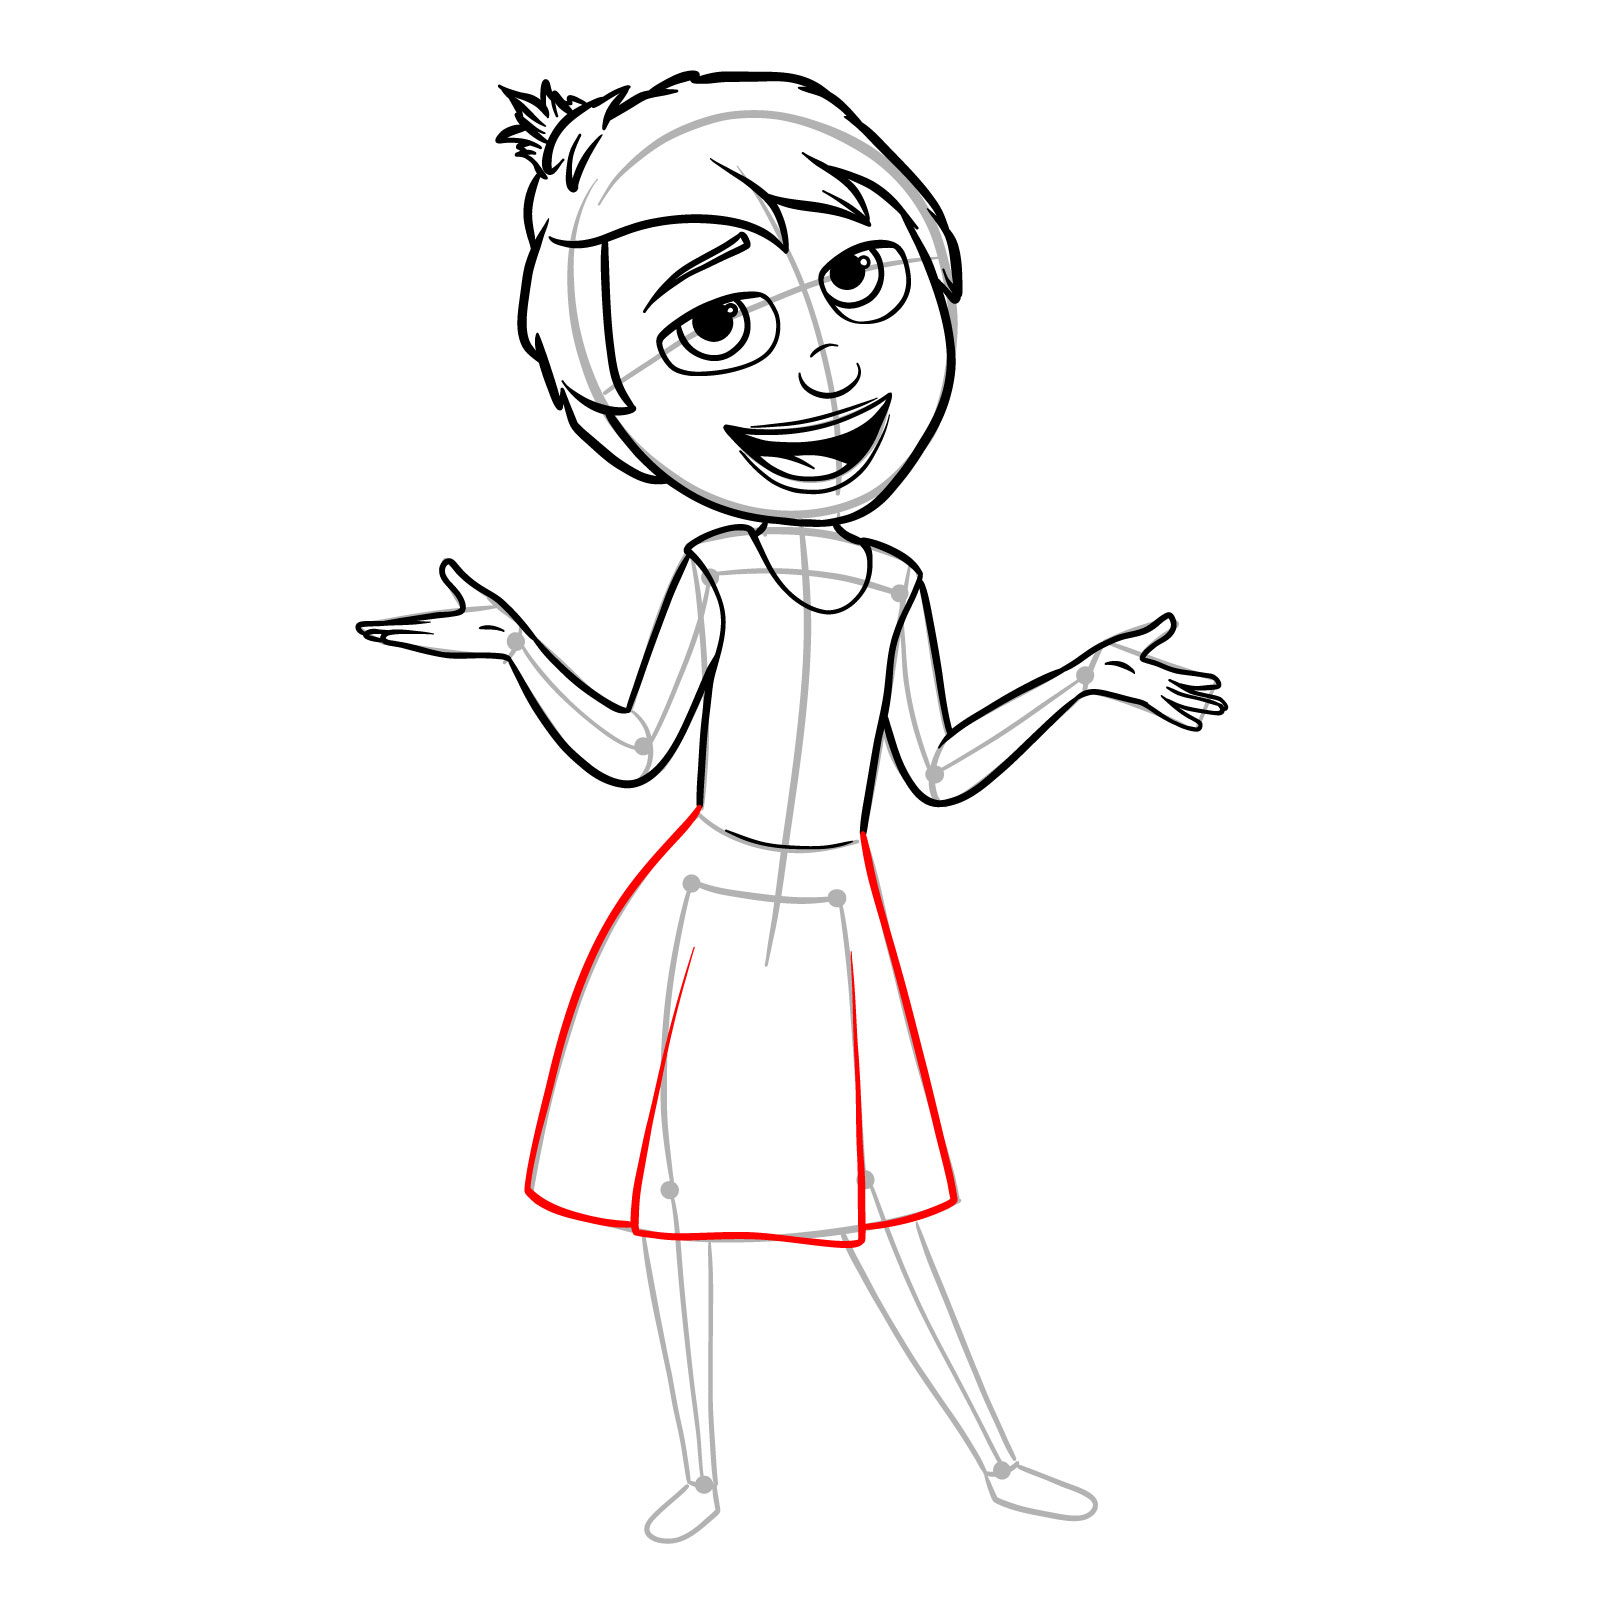 How to draw Joy from Inside Out 2 - step 11